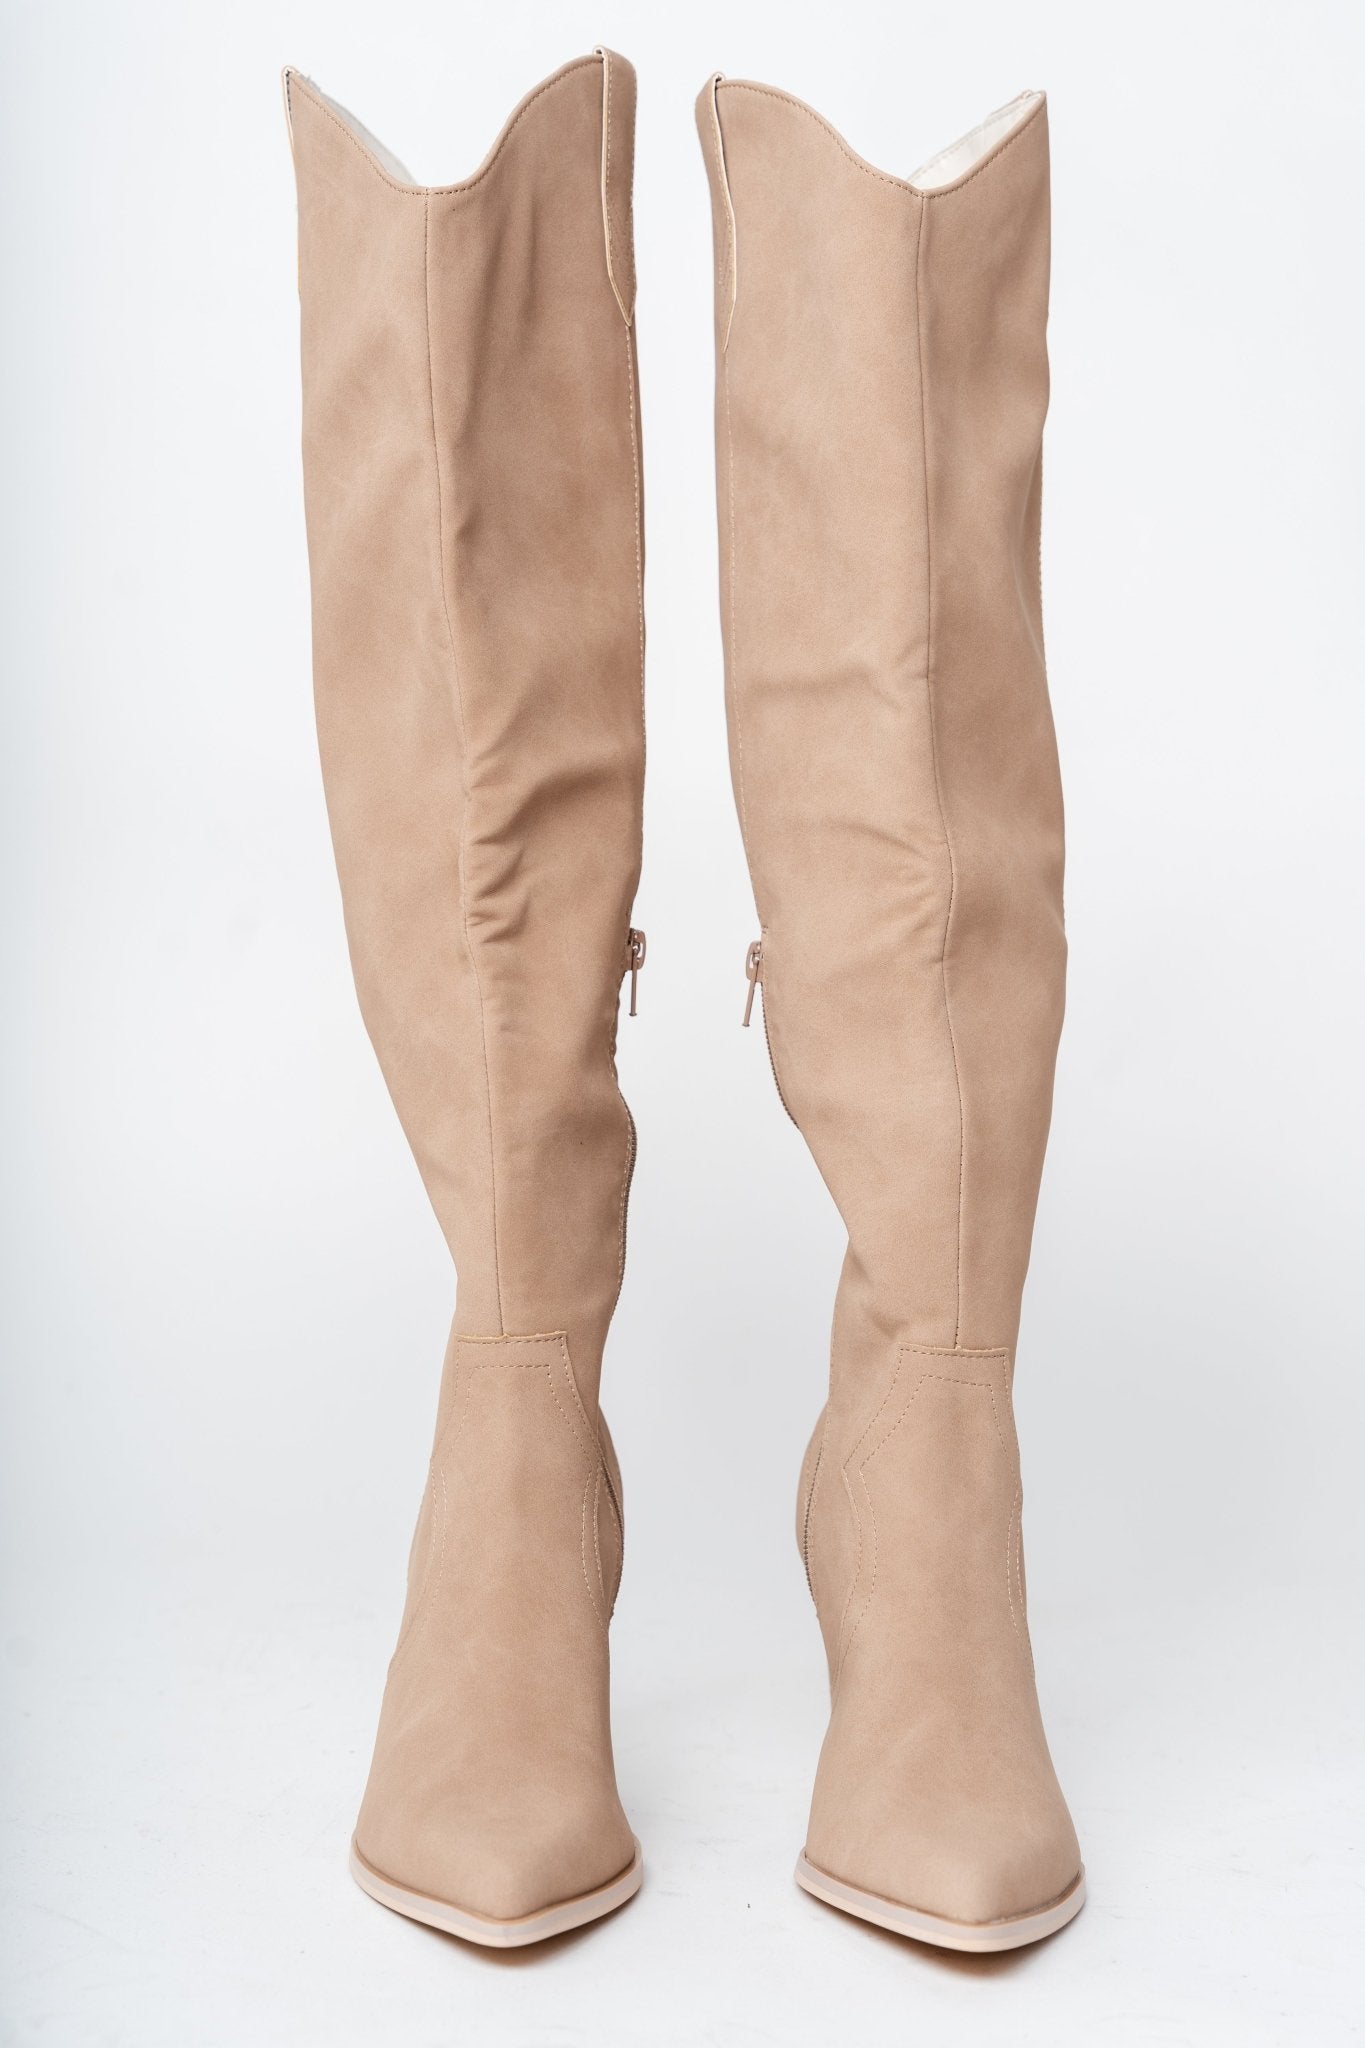 Saipan knee high boot cedar wood - Trendy shoes - Fashion Shoes at Lush Fashion Lounge Boutique in Oklahoma City